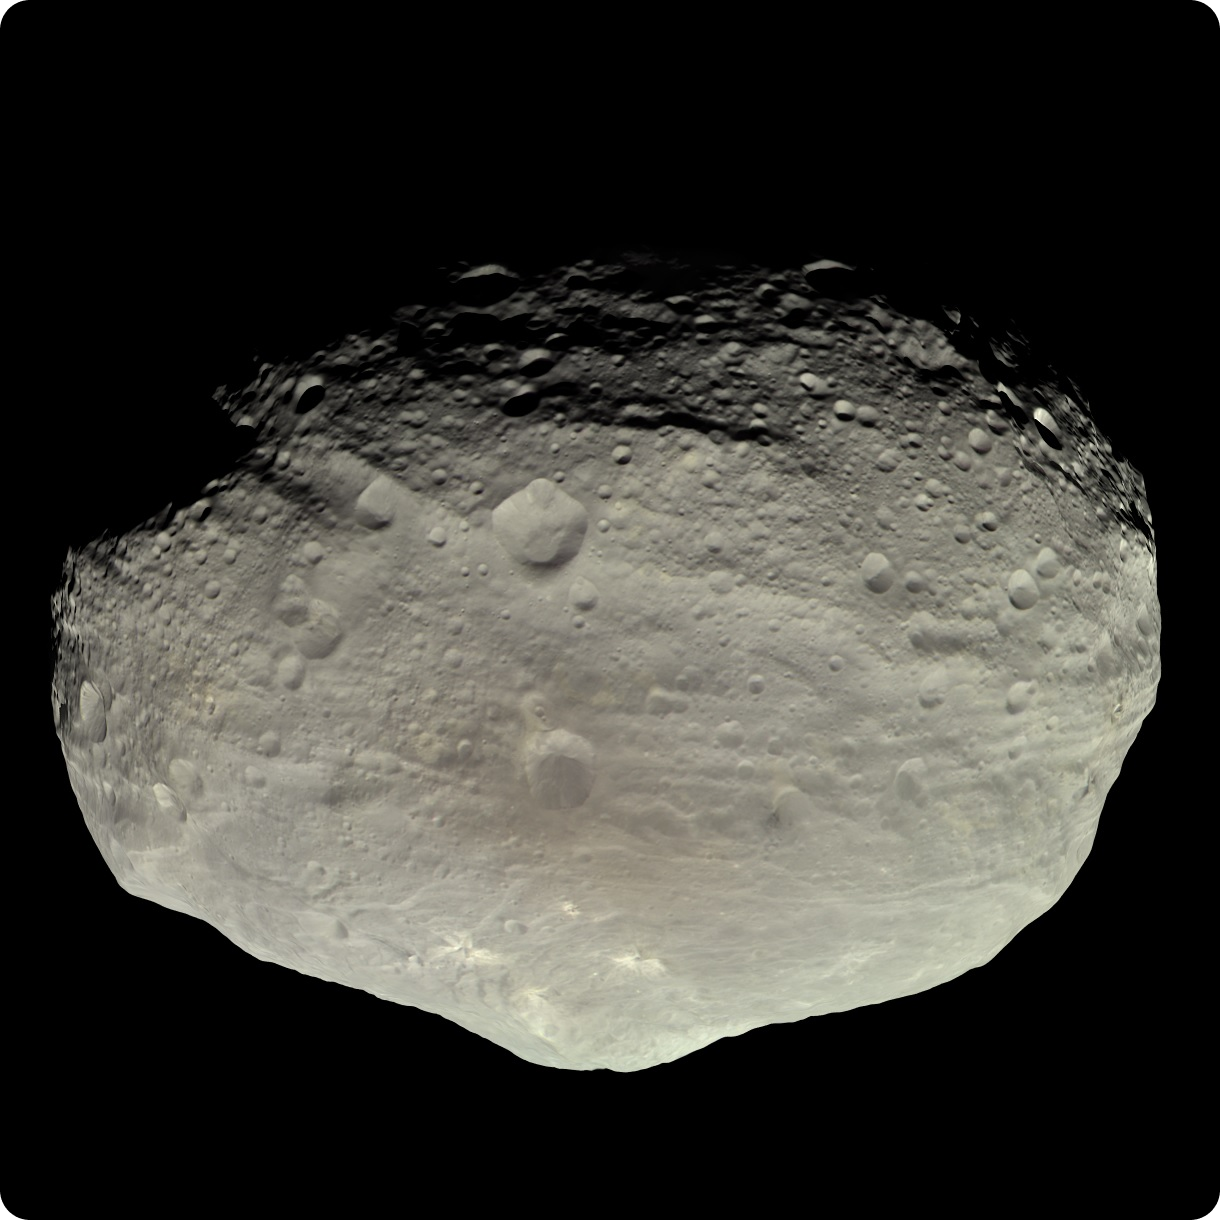 The famous asteroid "Vesta" looks like an ugly space potato.